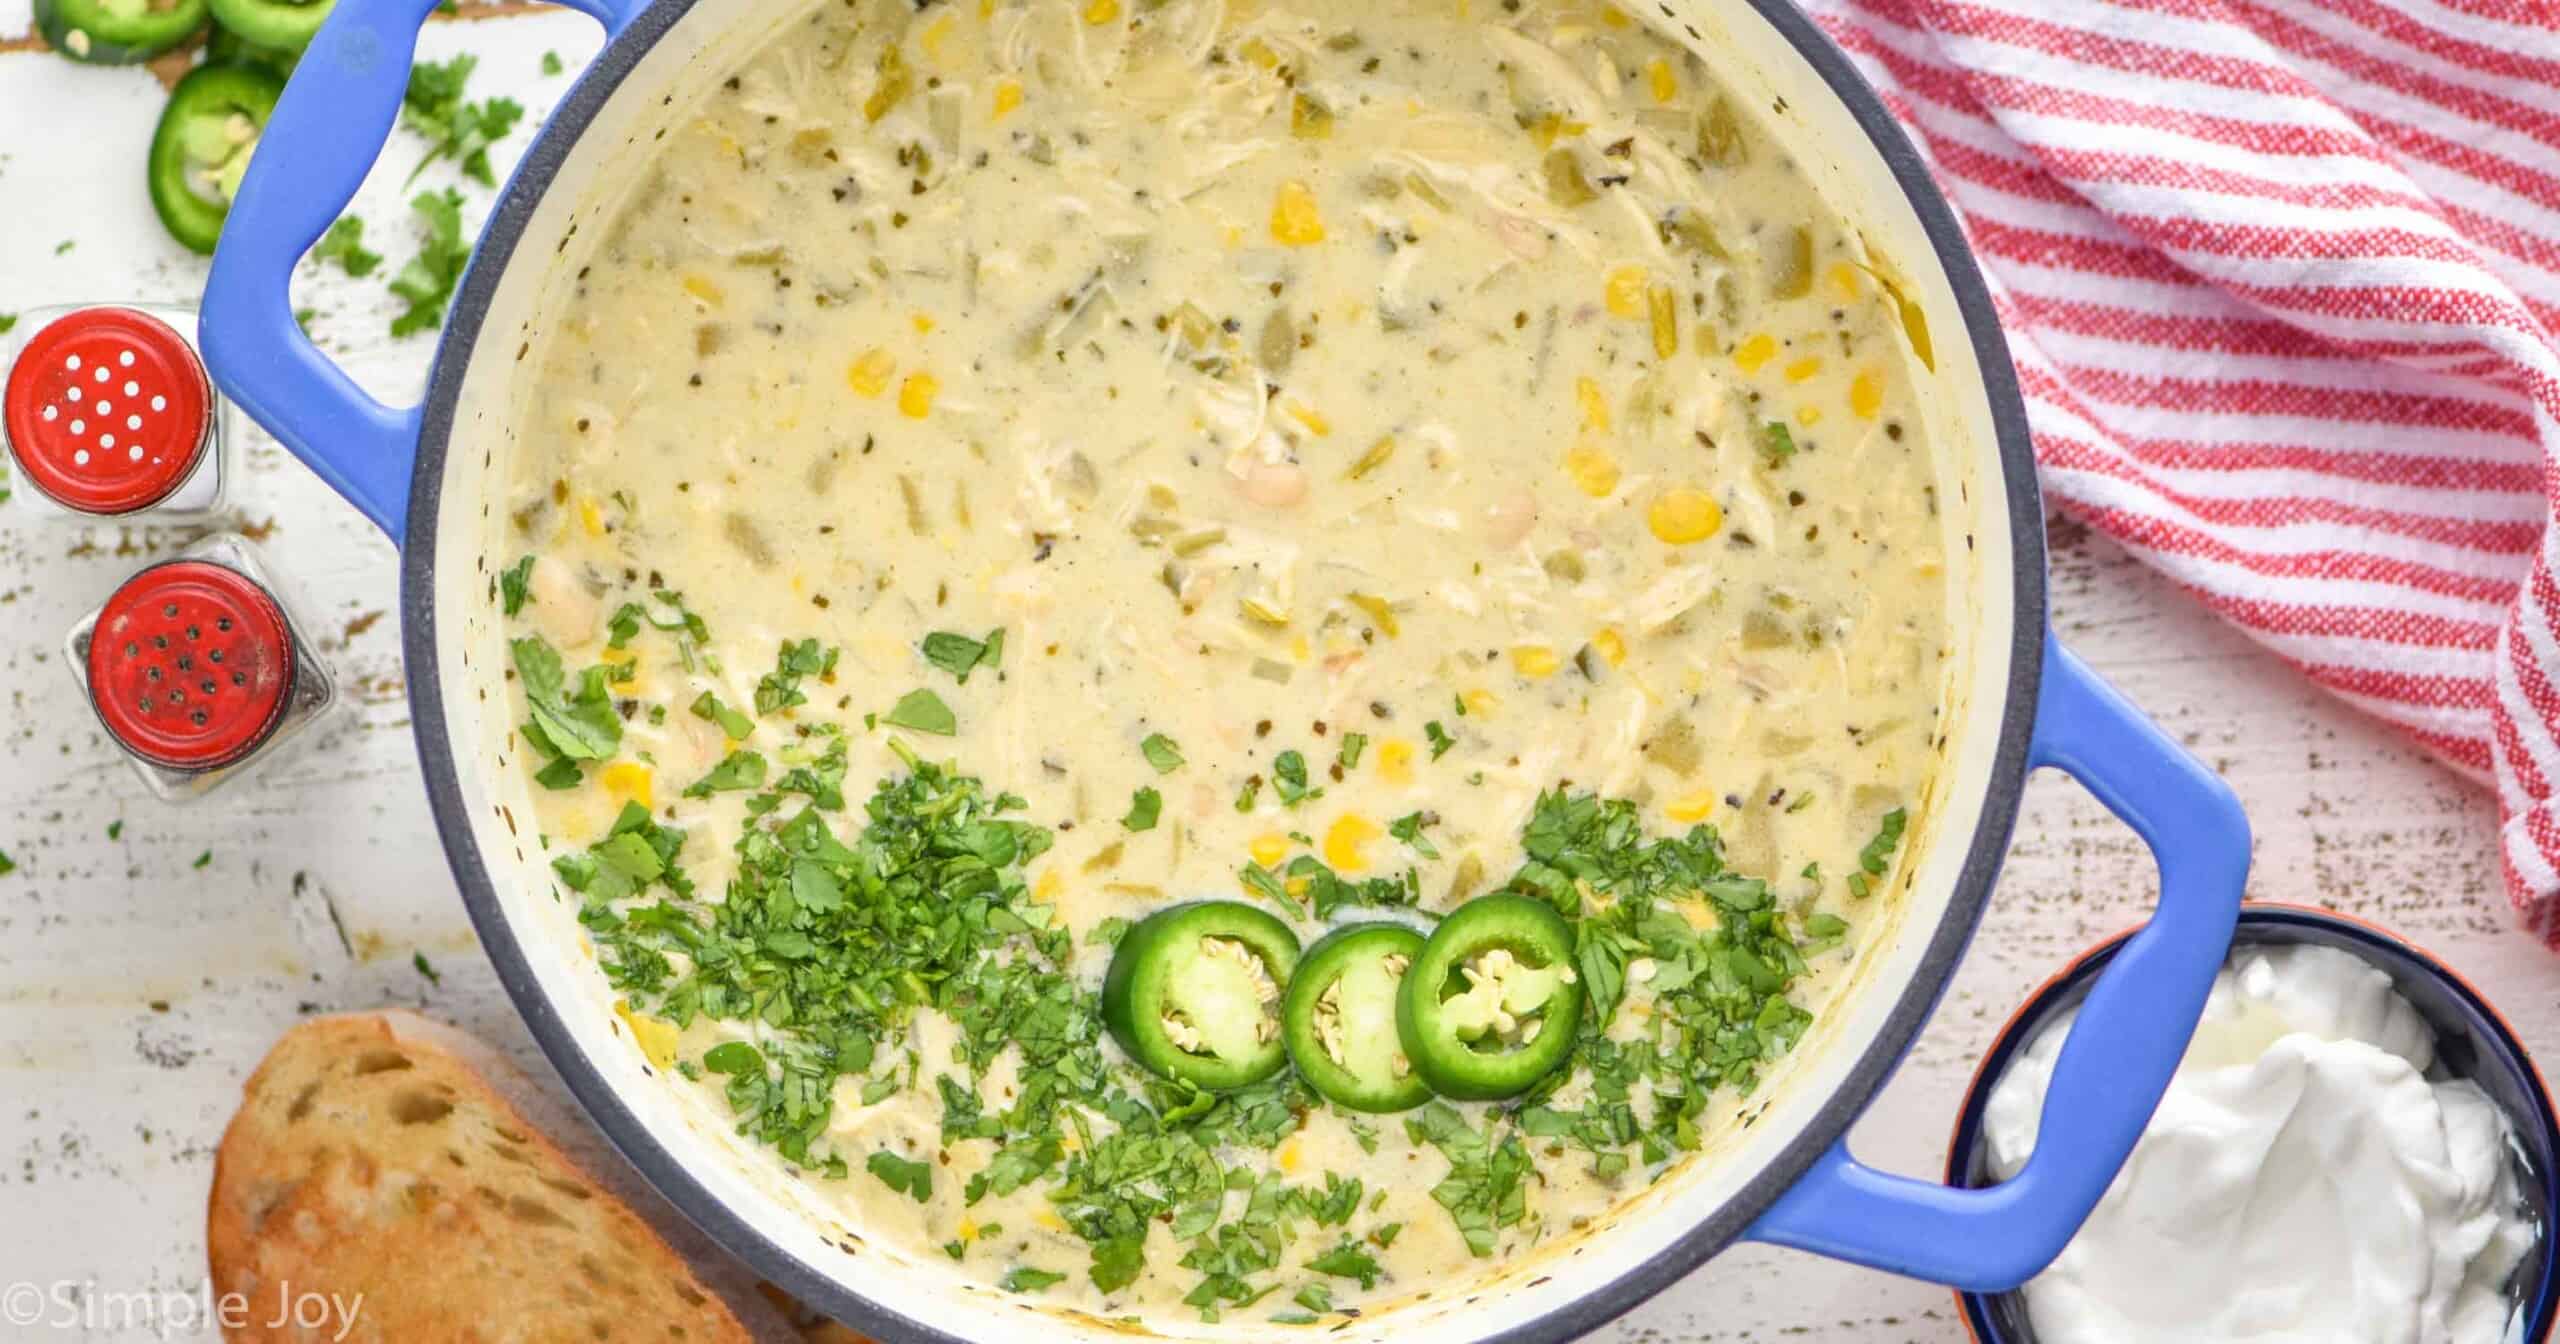 https://www.simplejoy.com/wp-content/uploads/2022/01/white-bean-chicken-chili-social-share-scaled.jpg